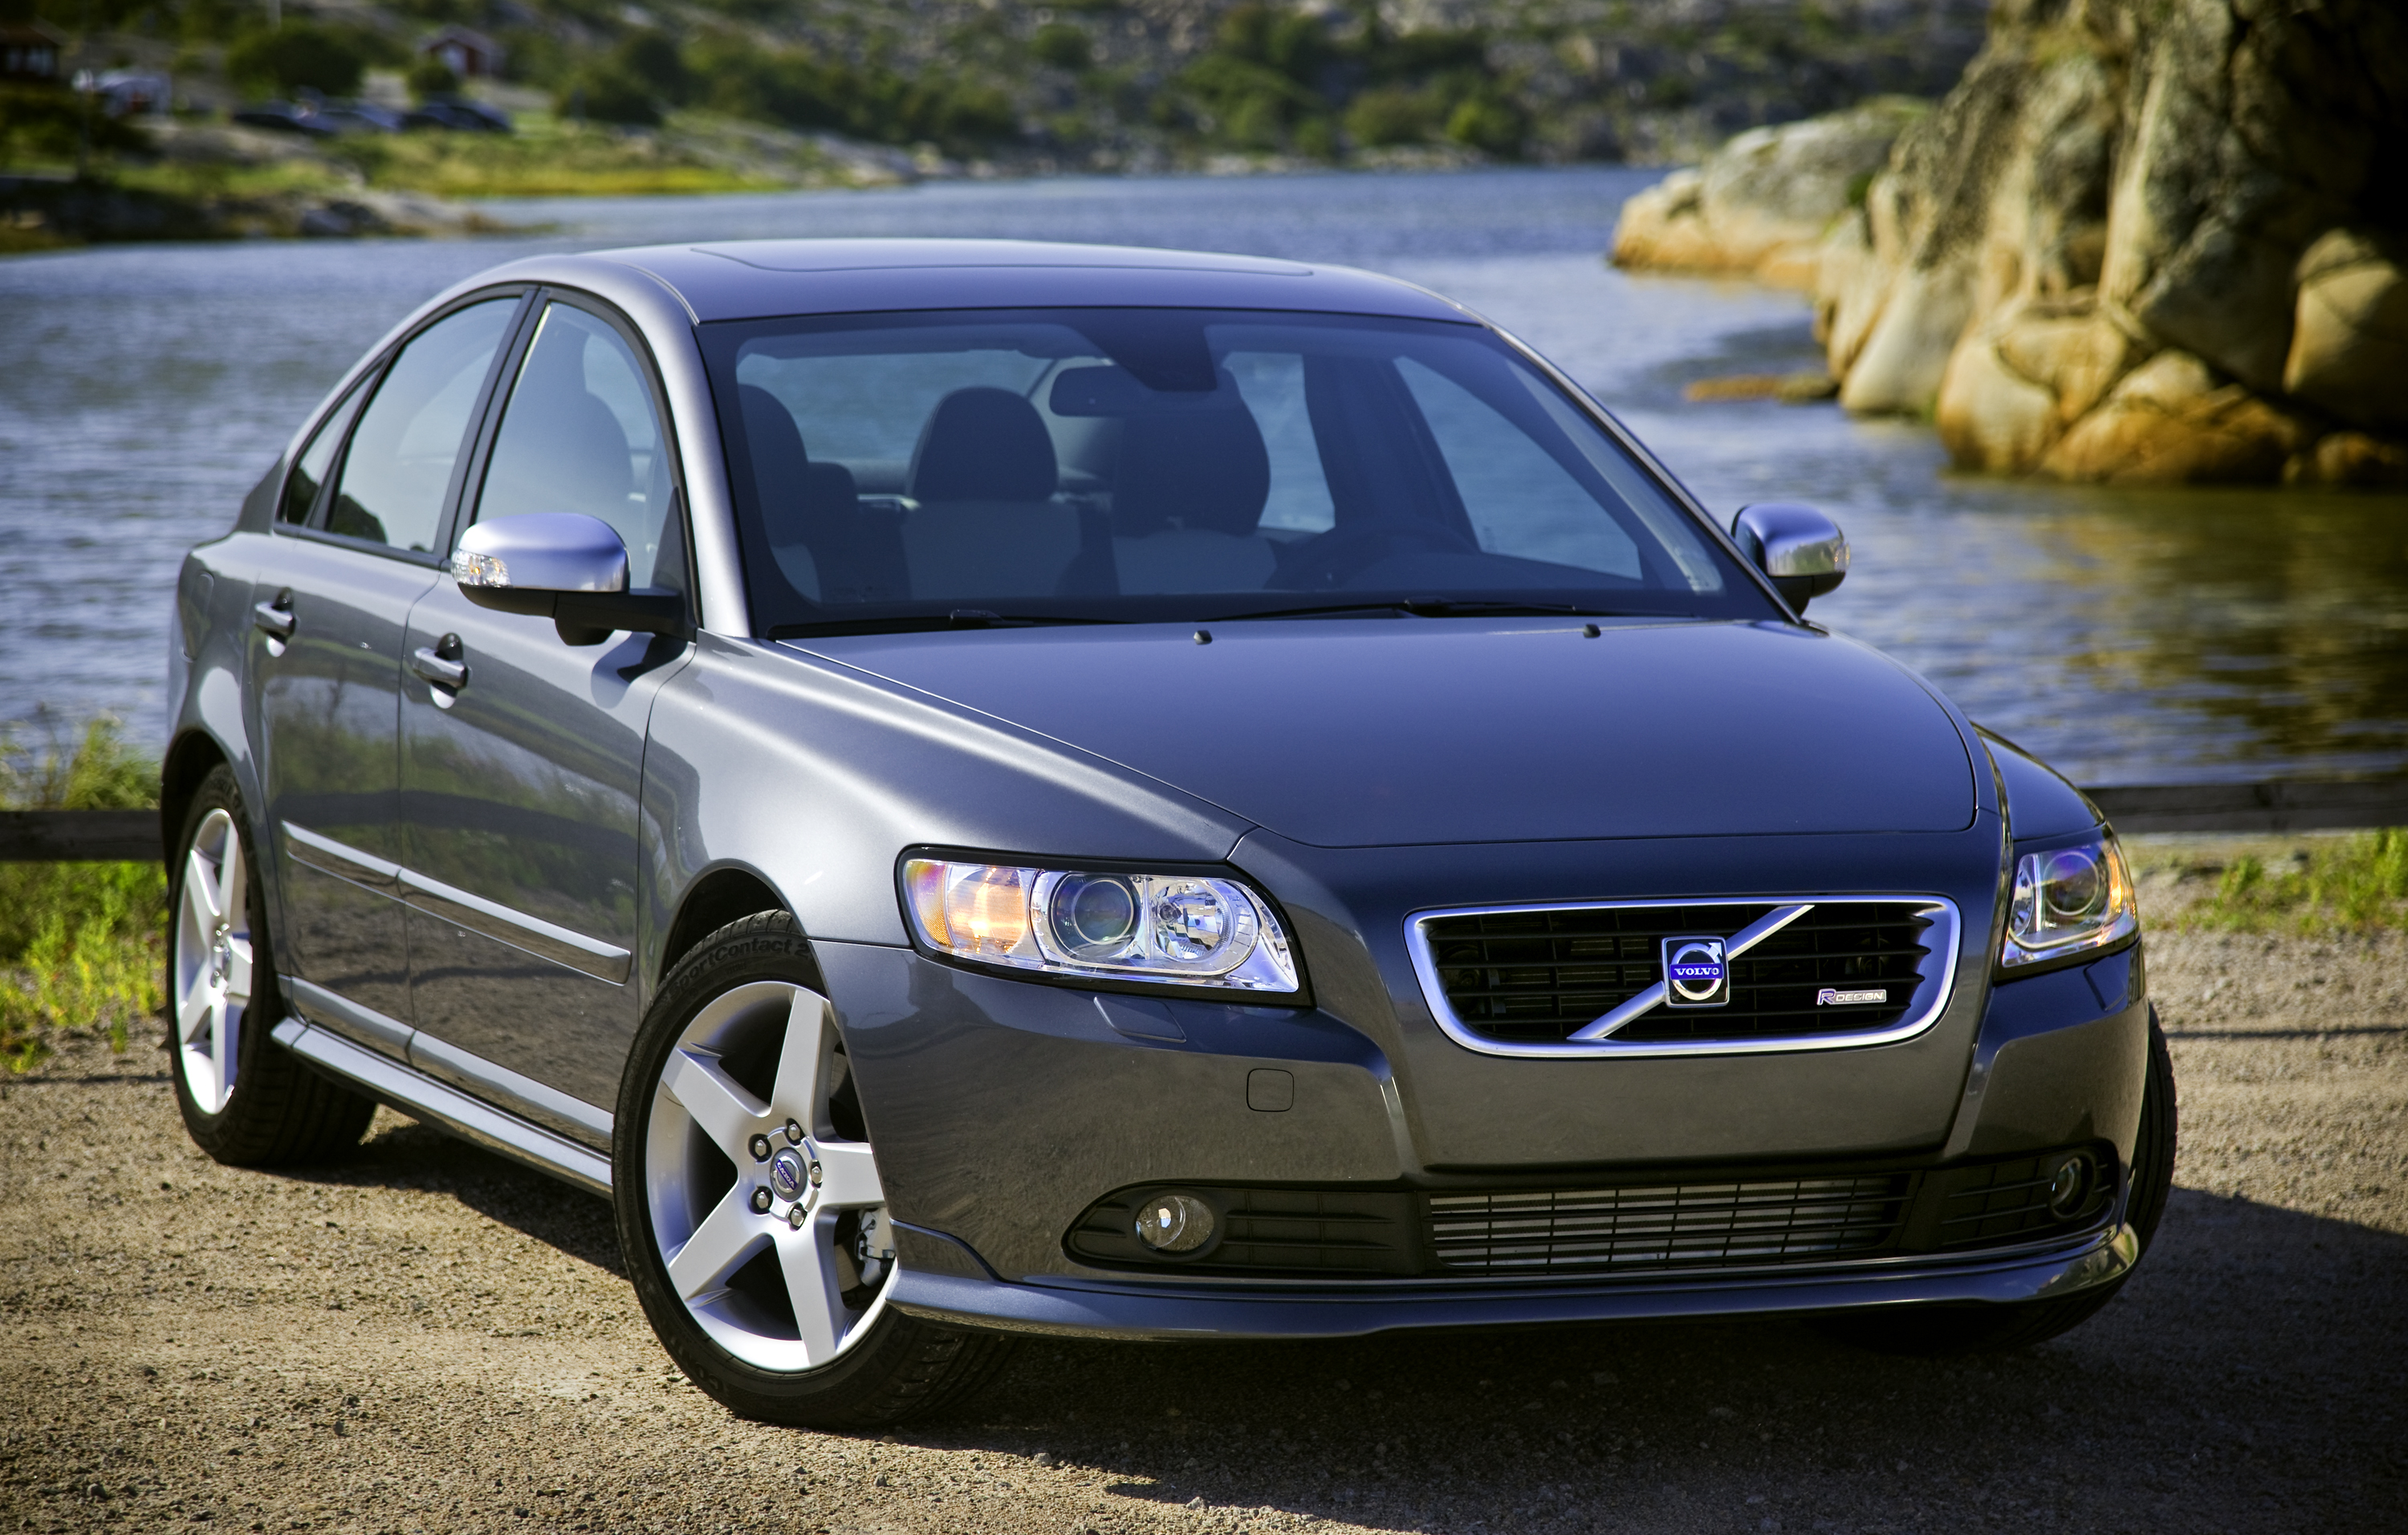 HQ Volvo S40 Wallpapers | File 3279.99Kb